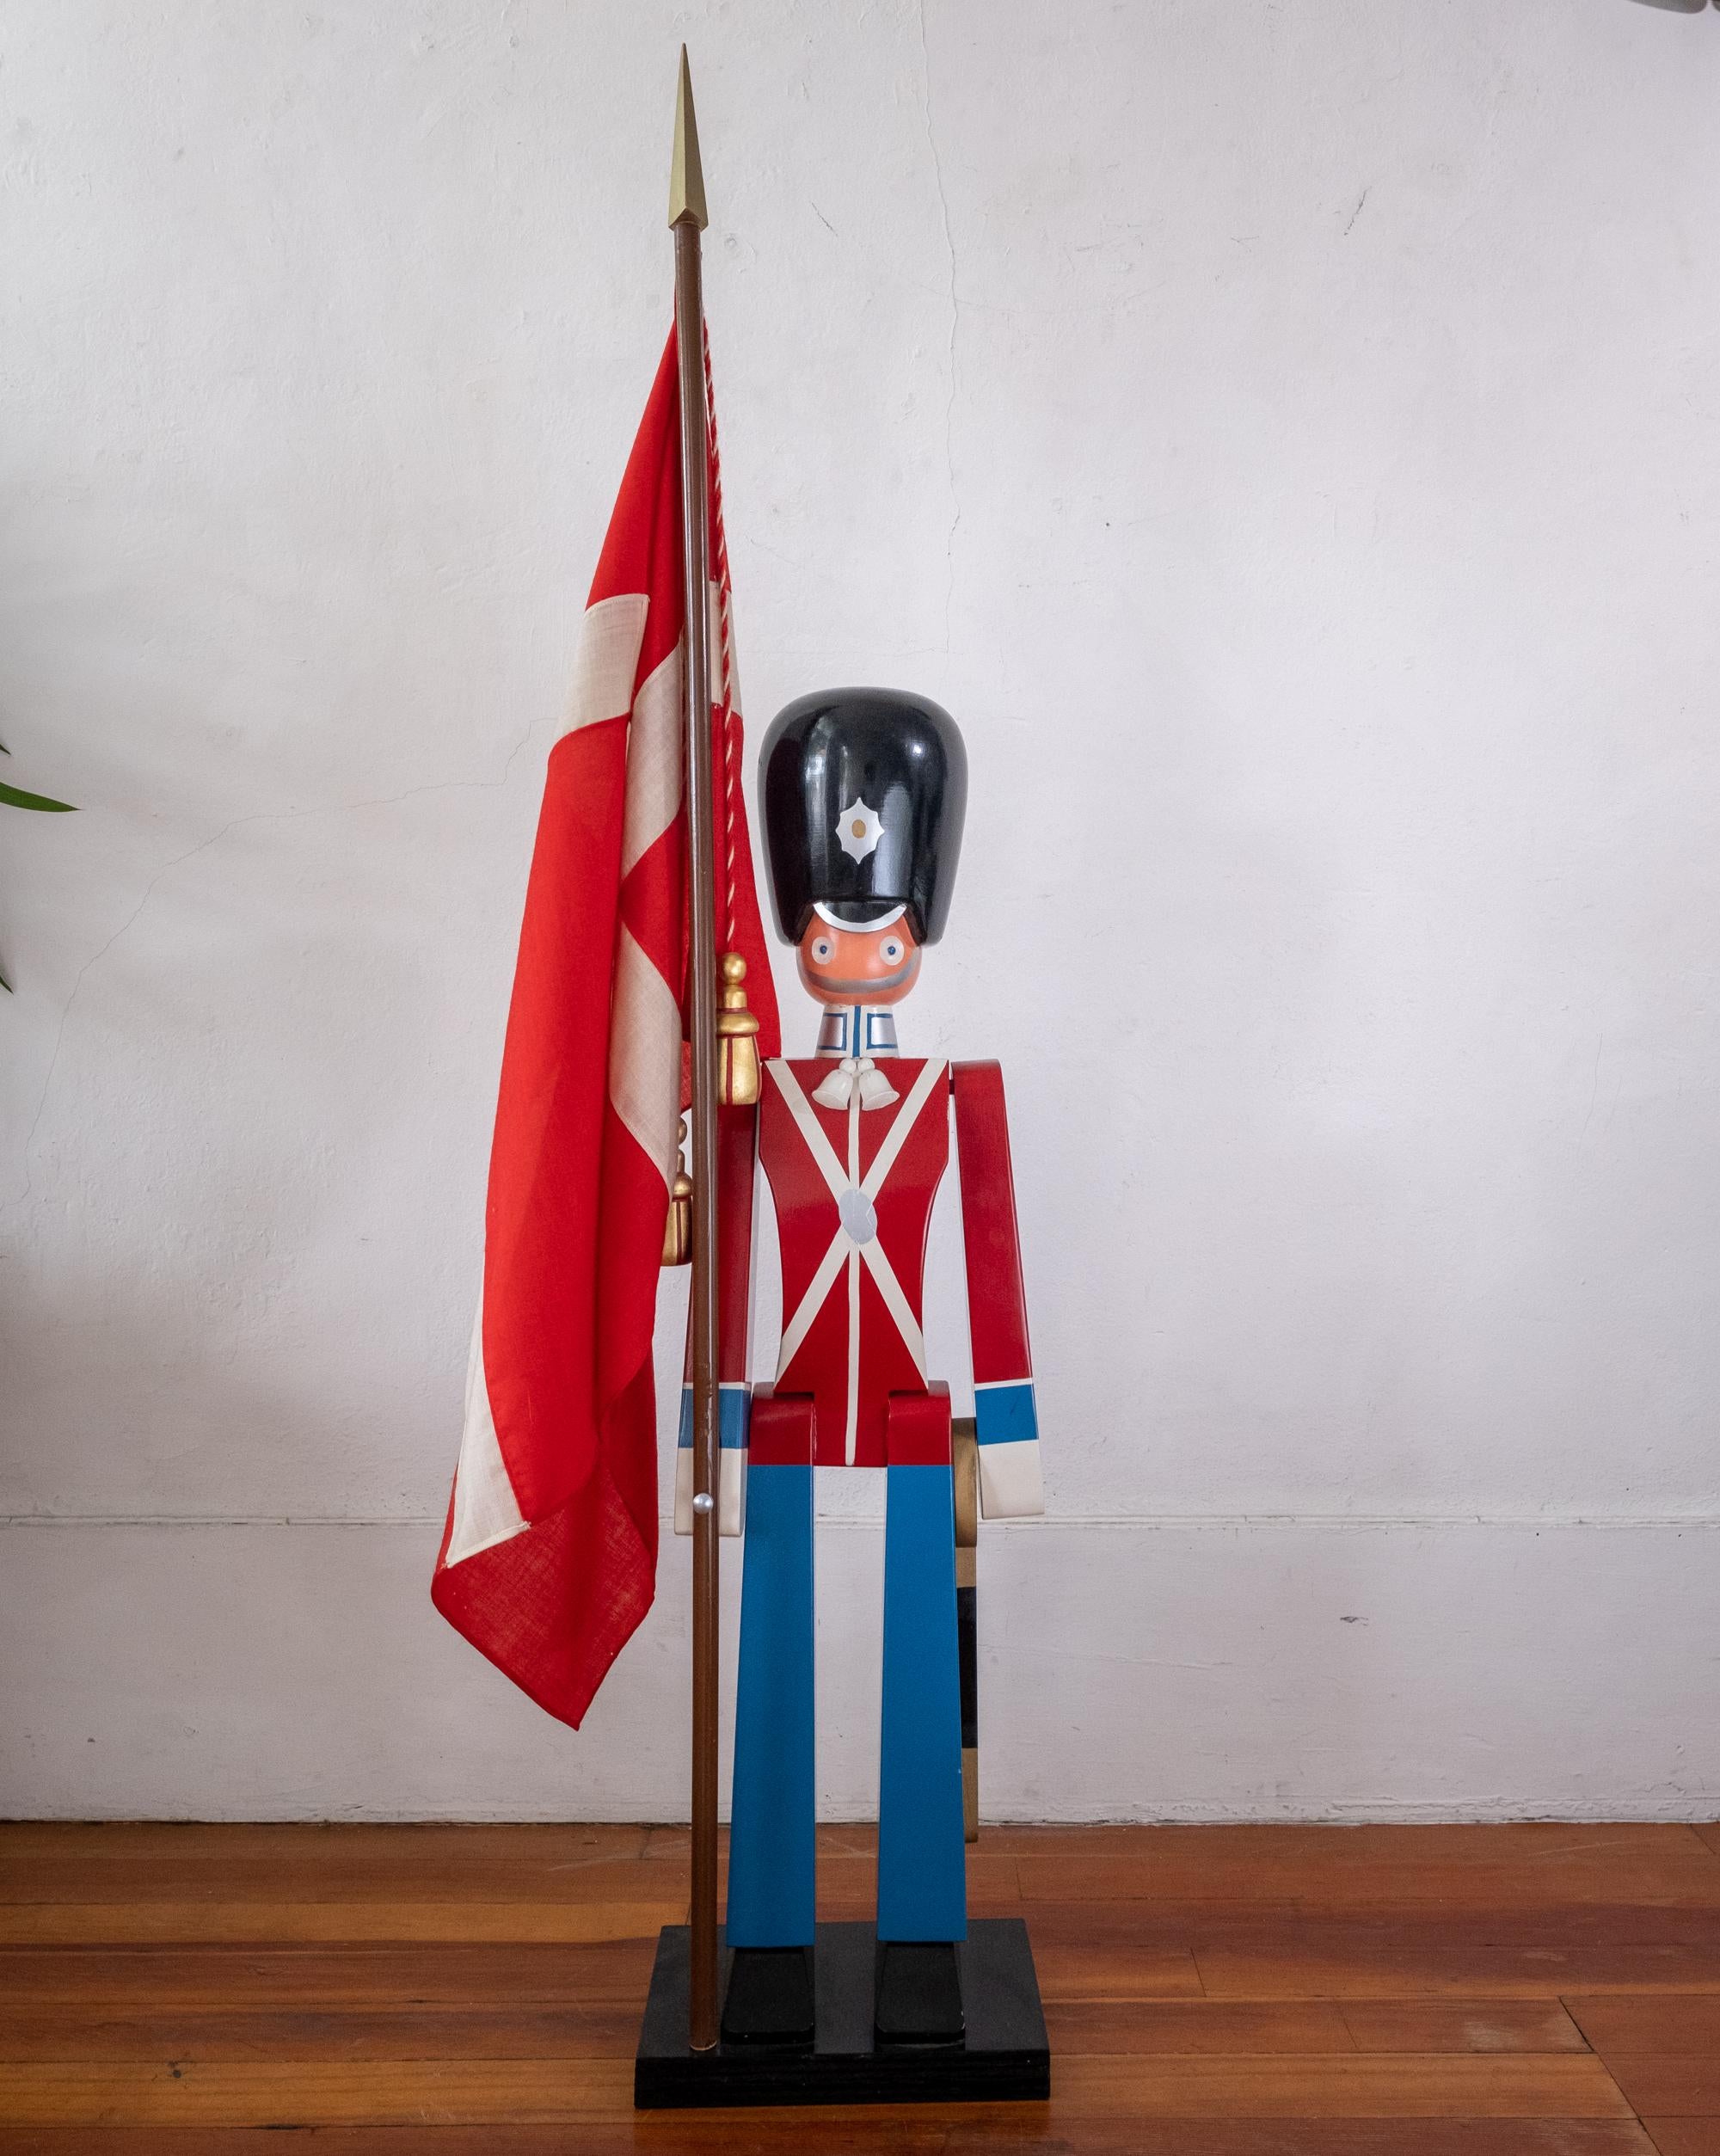 Huge Wooden Toy Soldier by Kay Bojesen 1